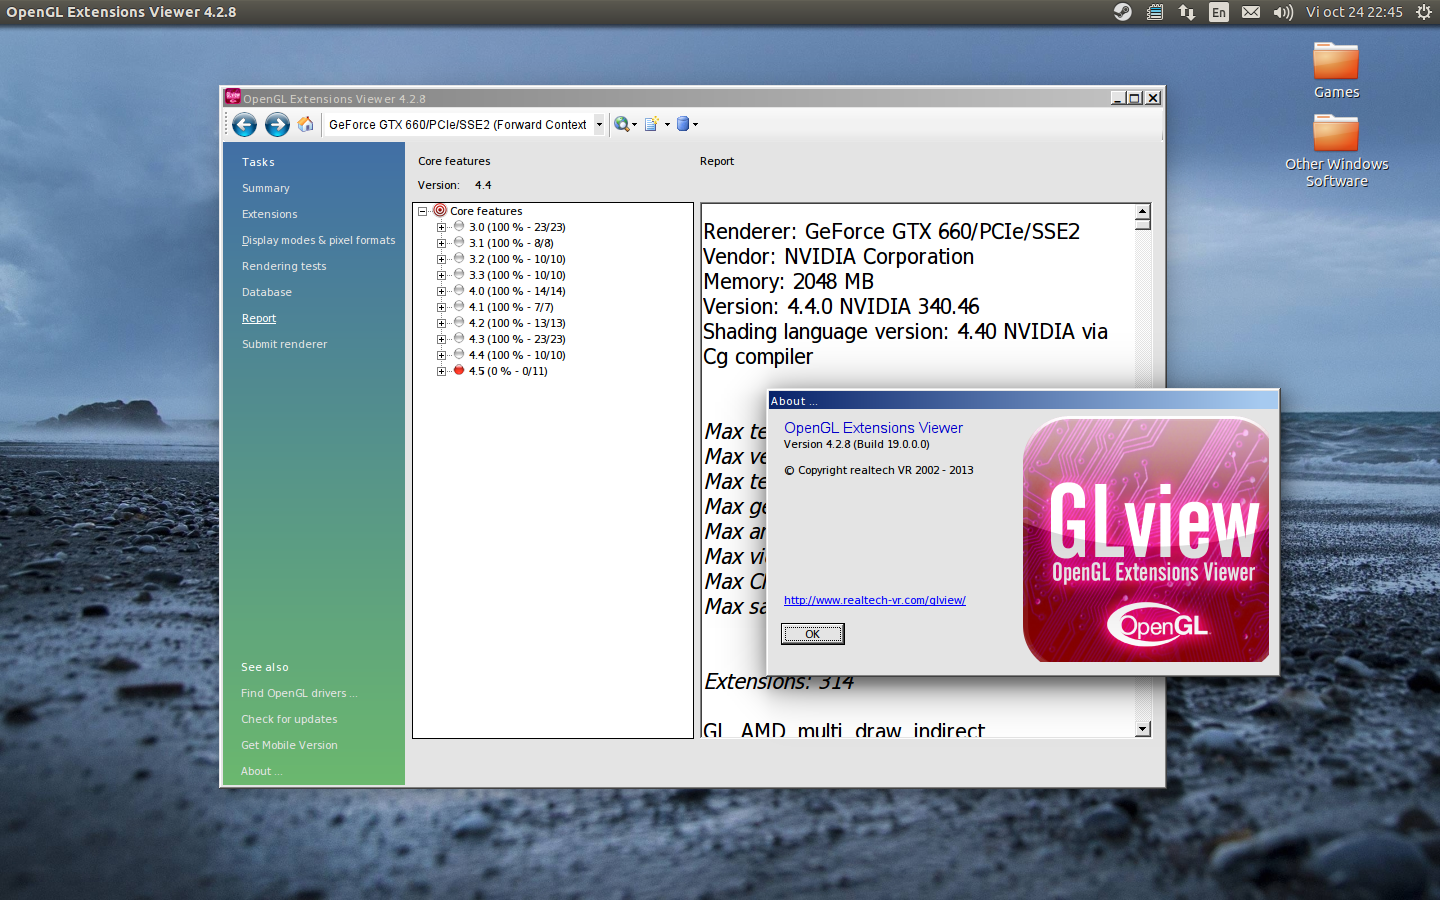 opengl extensions viewer v4.07